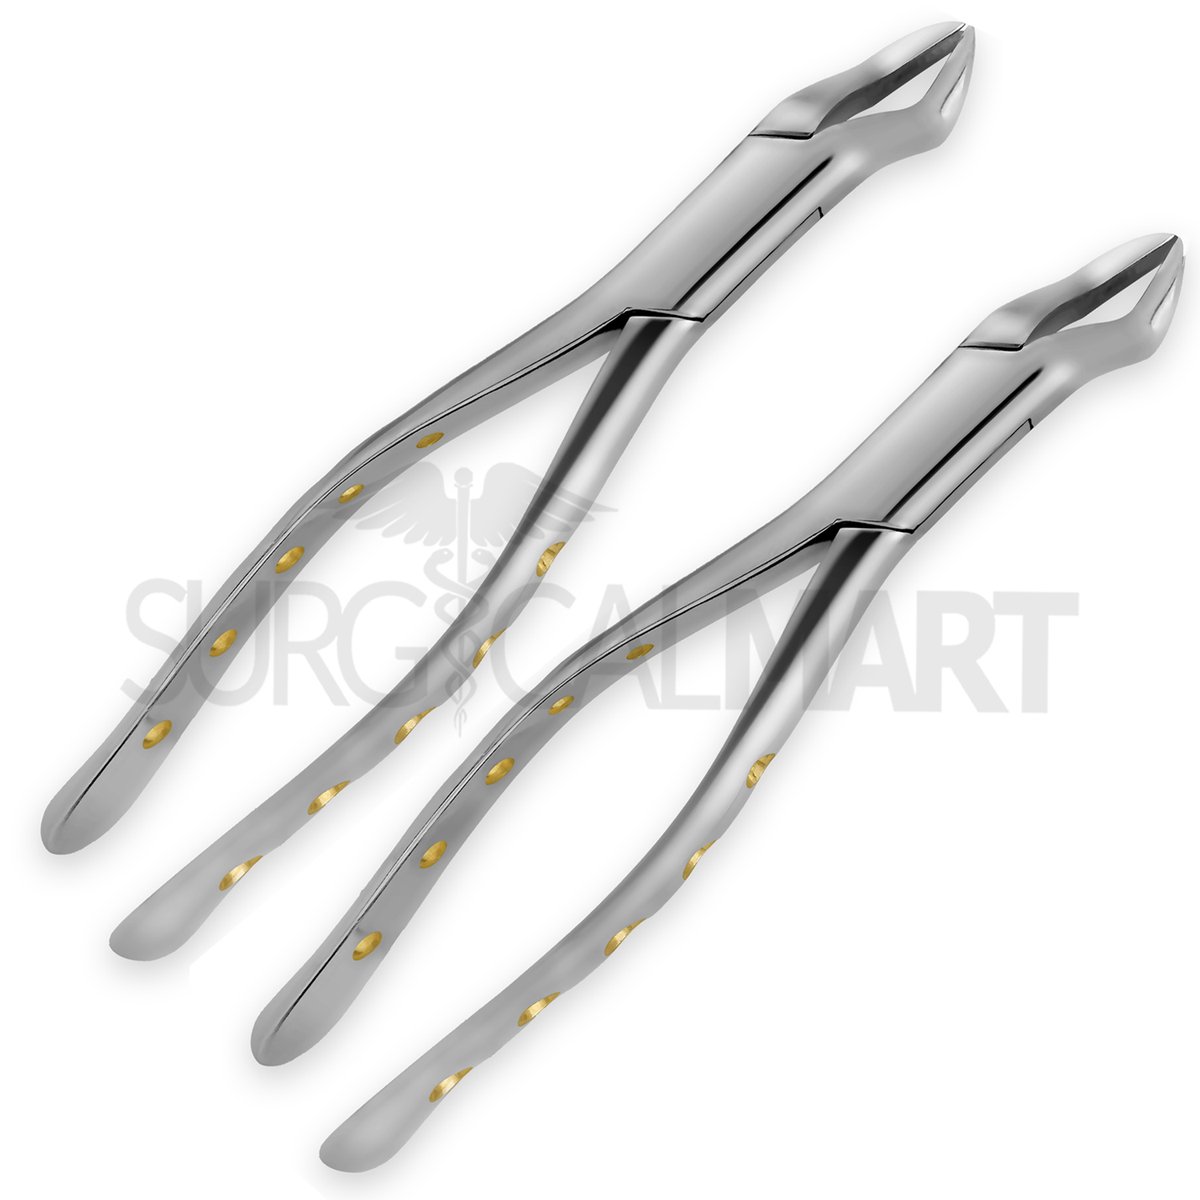 🔥 SAVE -45% on⚡2 #ExtractingForceps  Set 88R & 88L for Upper 1st & 2nd Molars with Gold Hollow Python Grip Handle🦷
Order now 👉surgicalmart.com/shop/dental-in…

#surgicalmart #extractionforcep88R #extractionforcep88L #americanextractingforceps #dentaltools #dentalforceps #shoponline